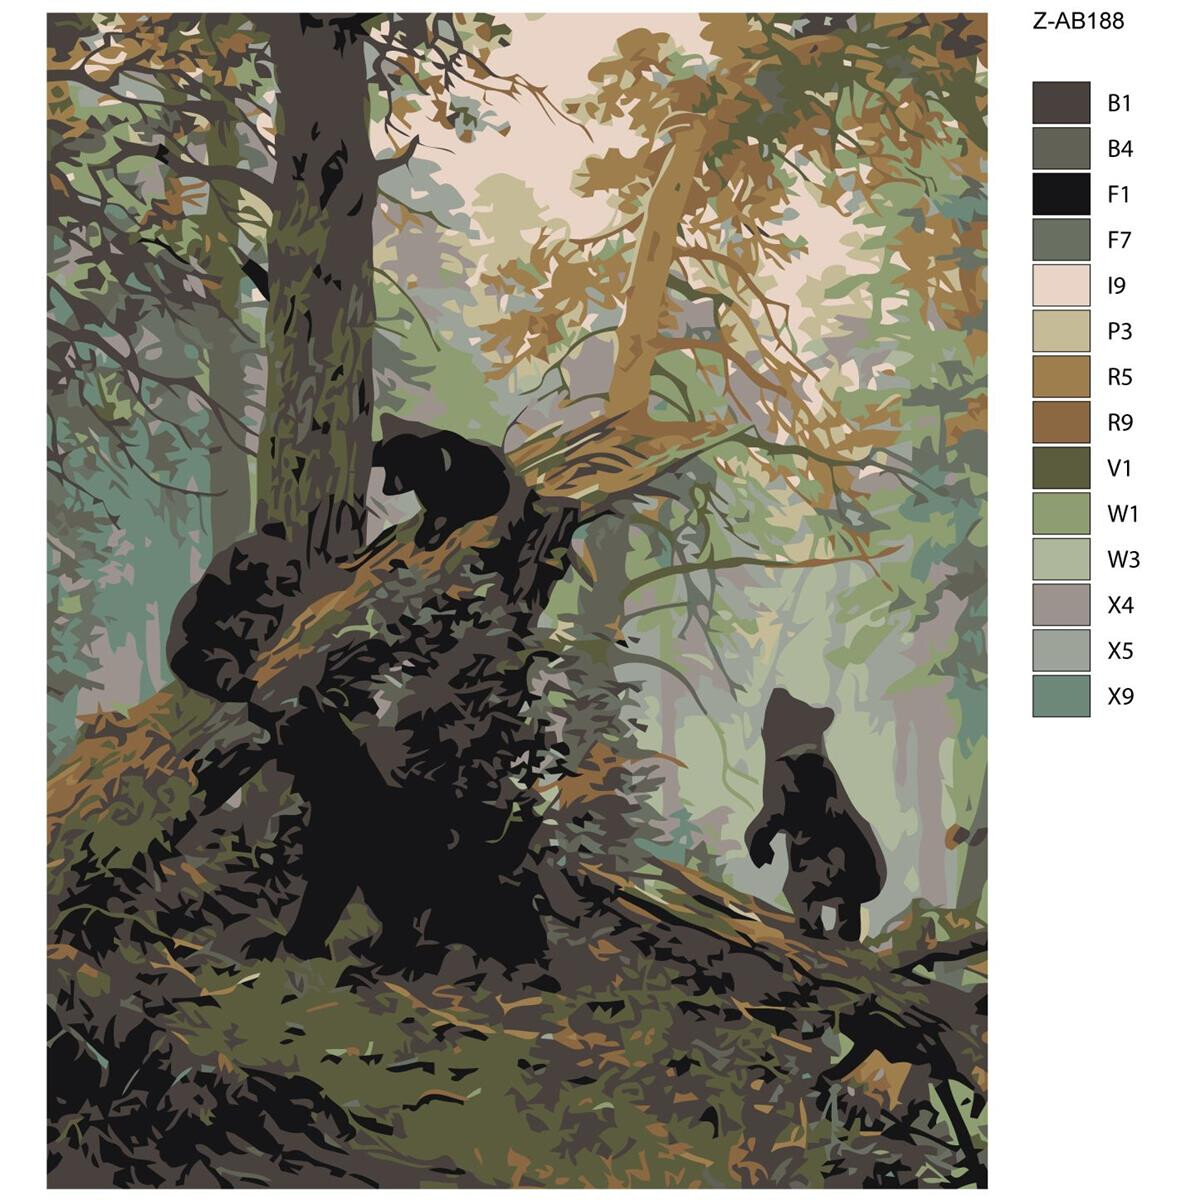 Paint by Numbers "Bear forest", 40x50cm, Z-AB188